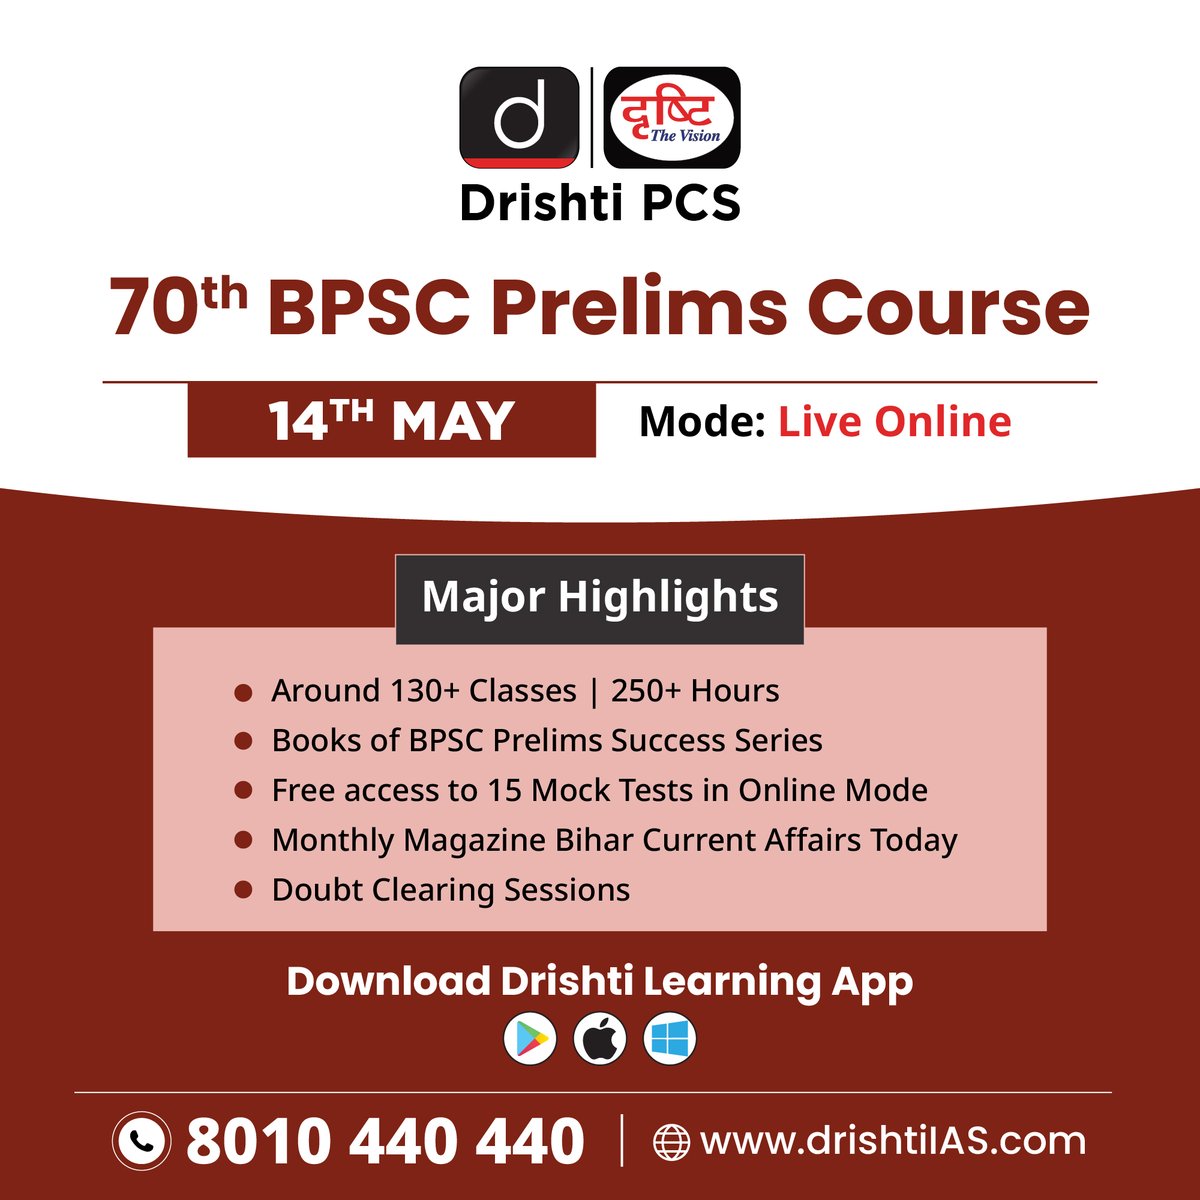 Join the league of successful aspirants with our 70th BPSC Prelims Course – Live Online Mode on 14th May. Join now: drishti.xyz/70thBPSC-Preli… #BPSC #CurrentAffairs #Course #PCS #StatePCS #Bihar #Prelims #Aspirants #Education #IAS #UPSC #StateServices #DrishtiIAS